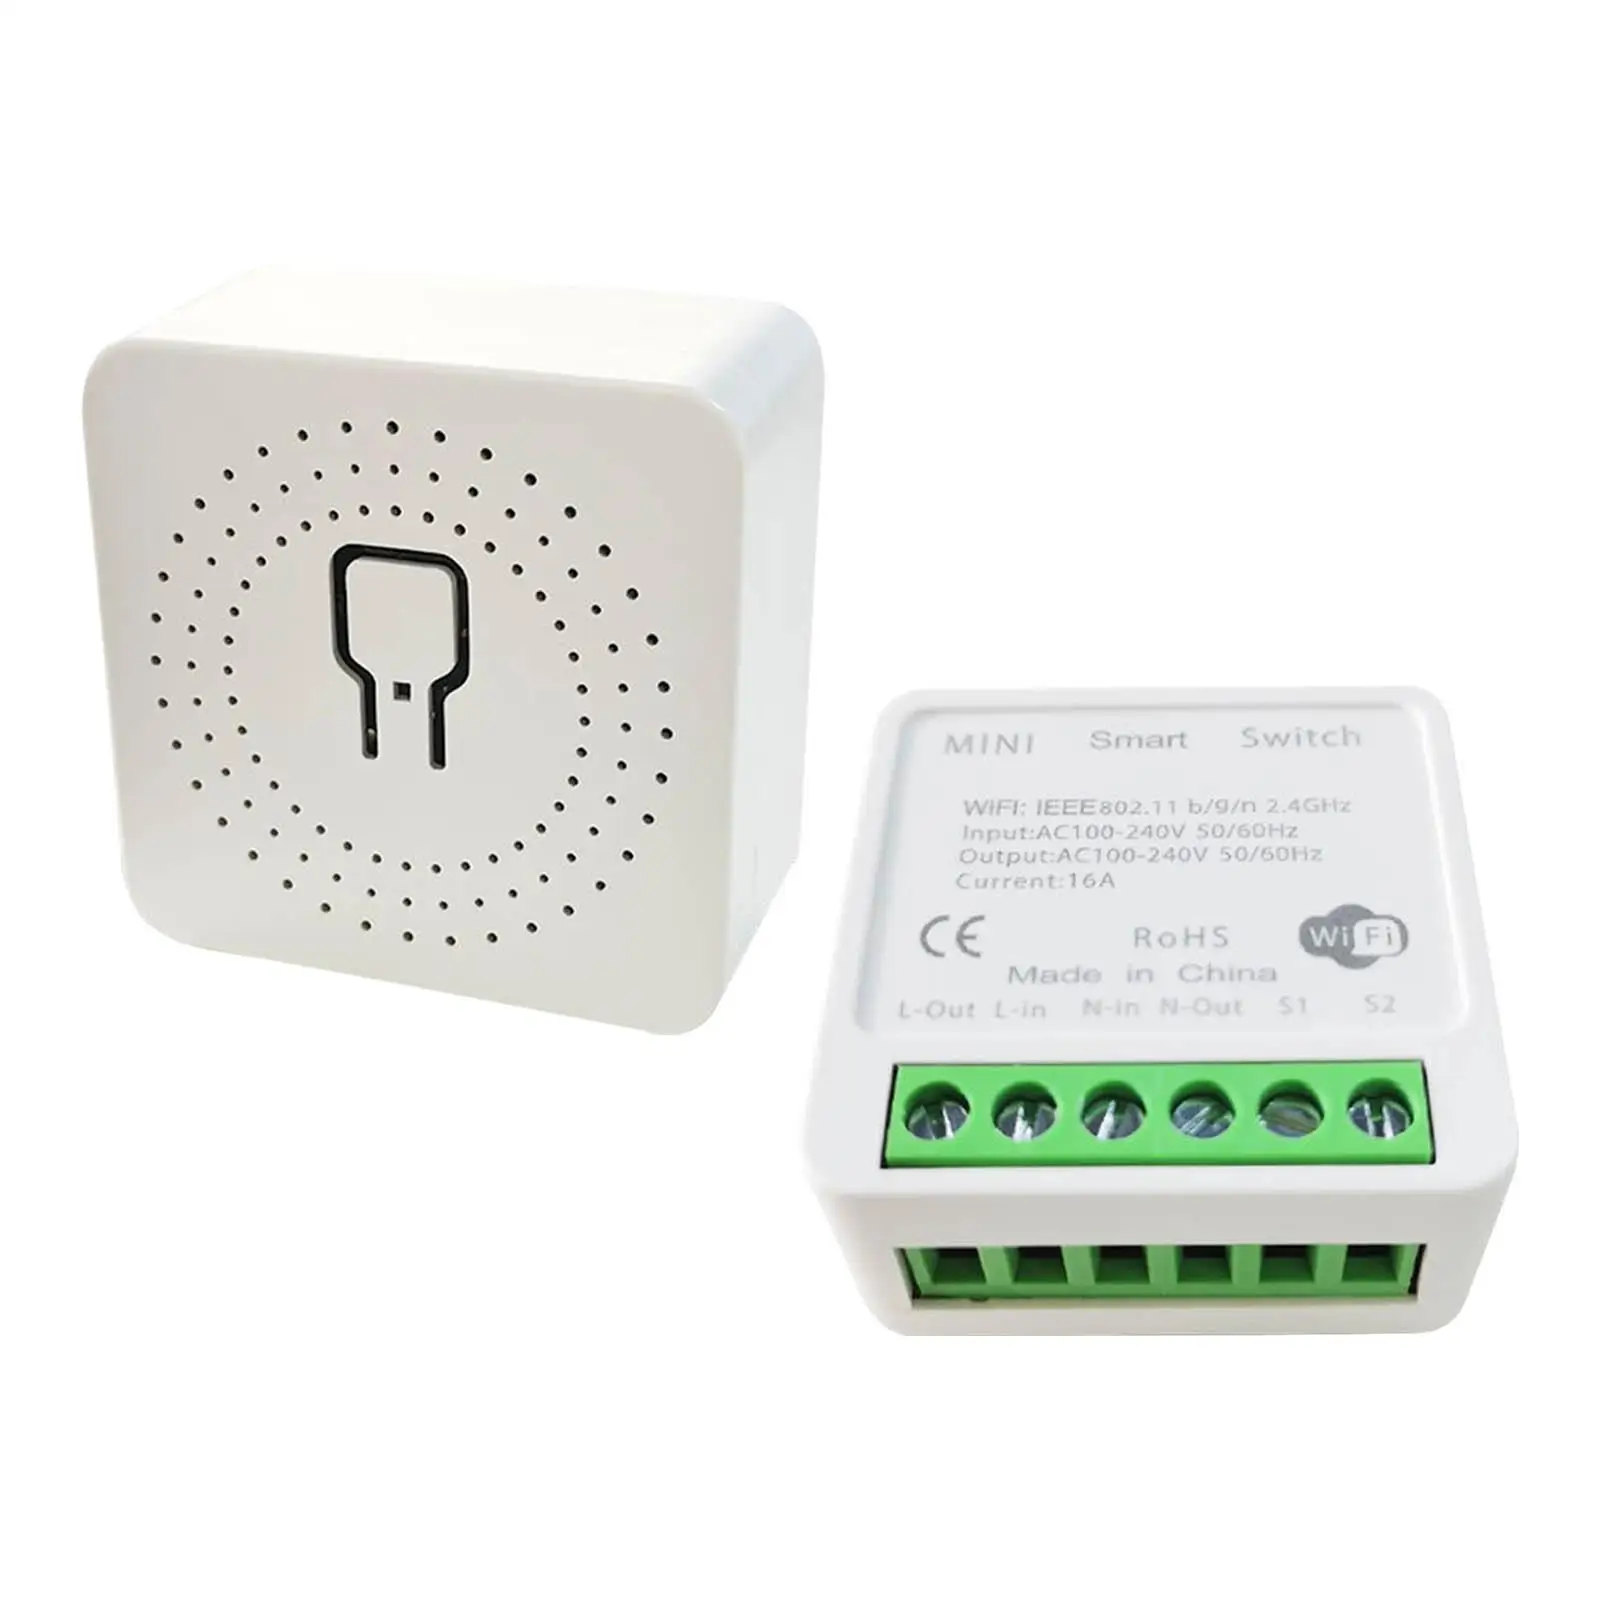 

16A Mini Smart Switch App Remote Control Timer Voice Assistants 2 Way Control Modules Appliance Automation DIY Breaker